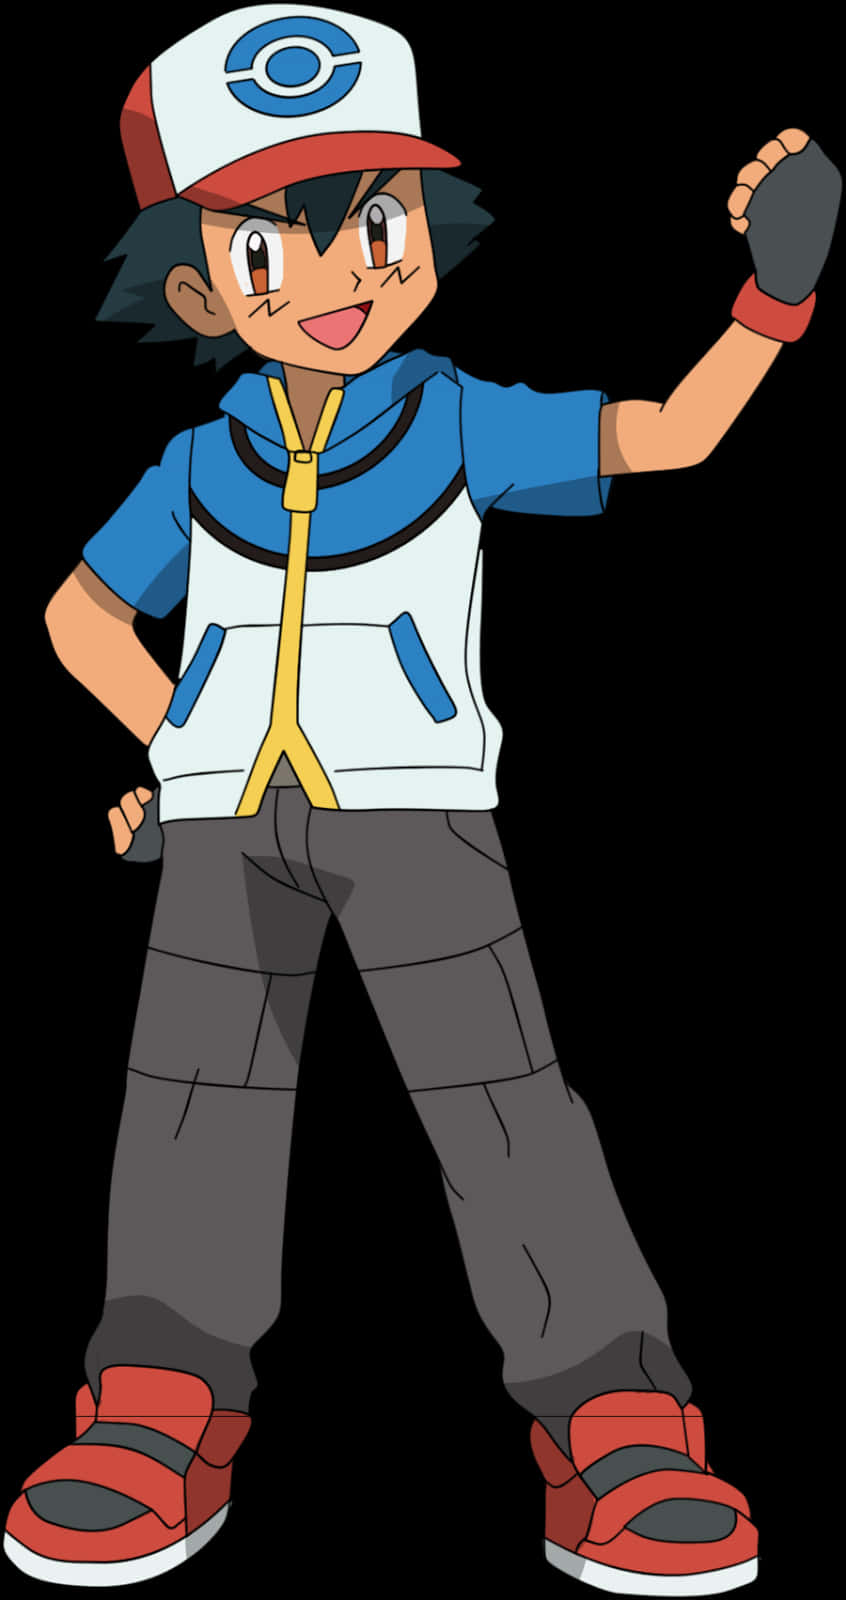 Ash Ketchum Pokemon Trainer Ready For Battle PNG image